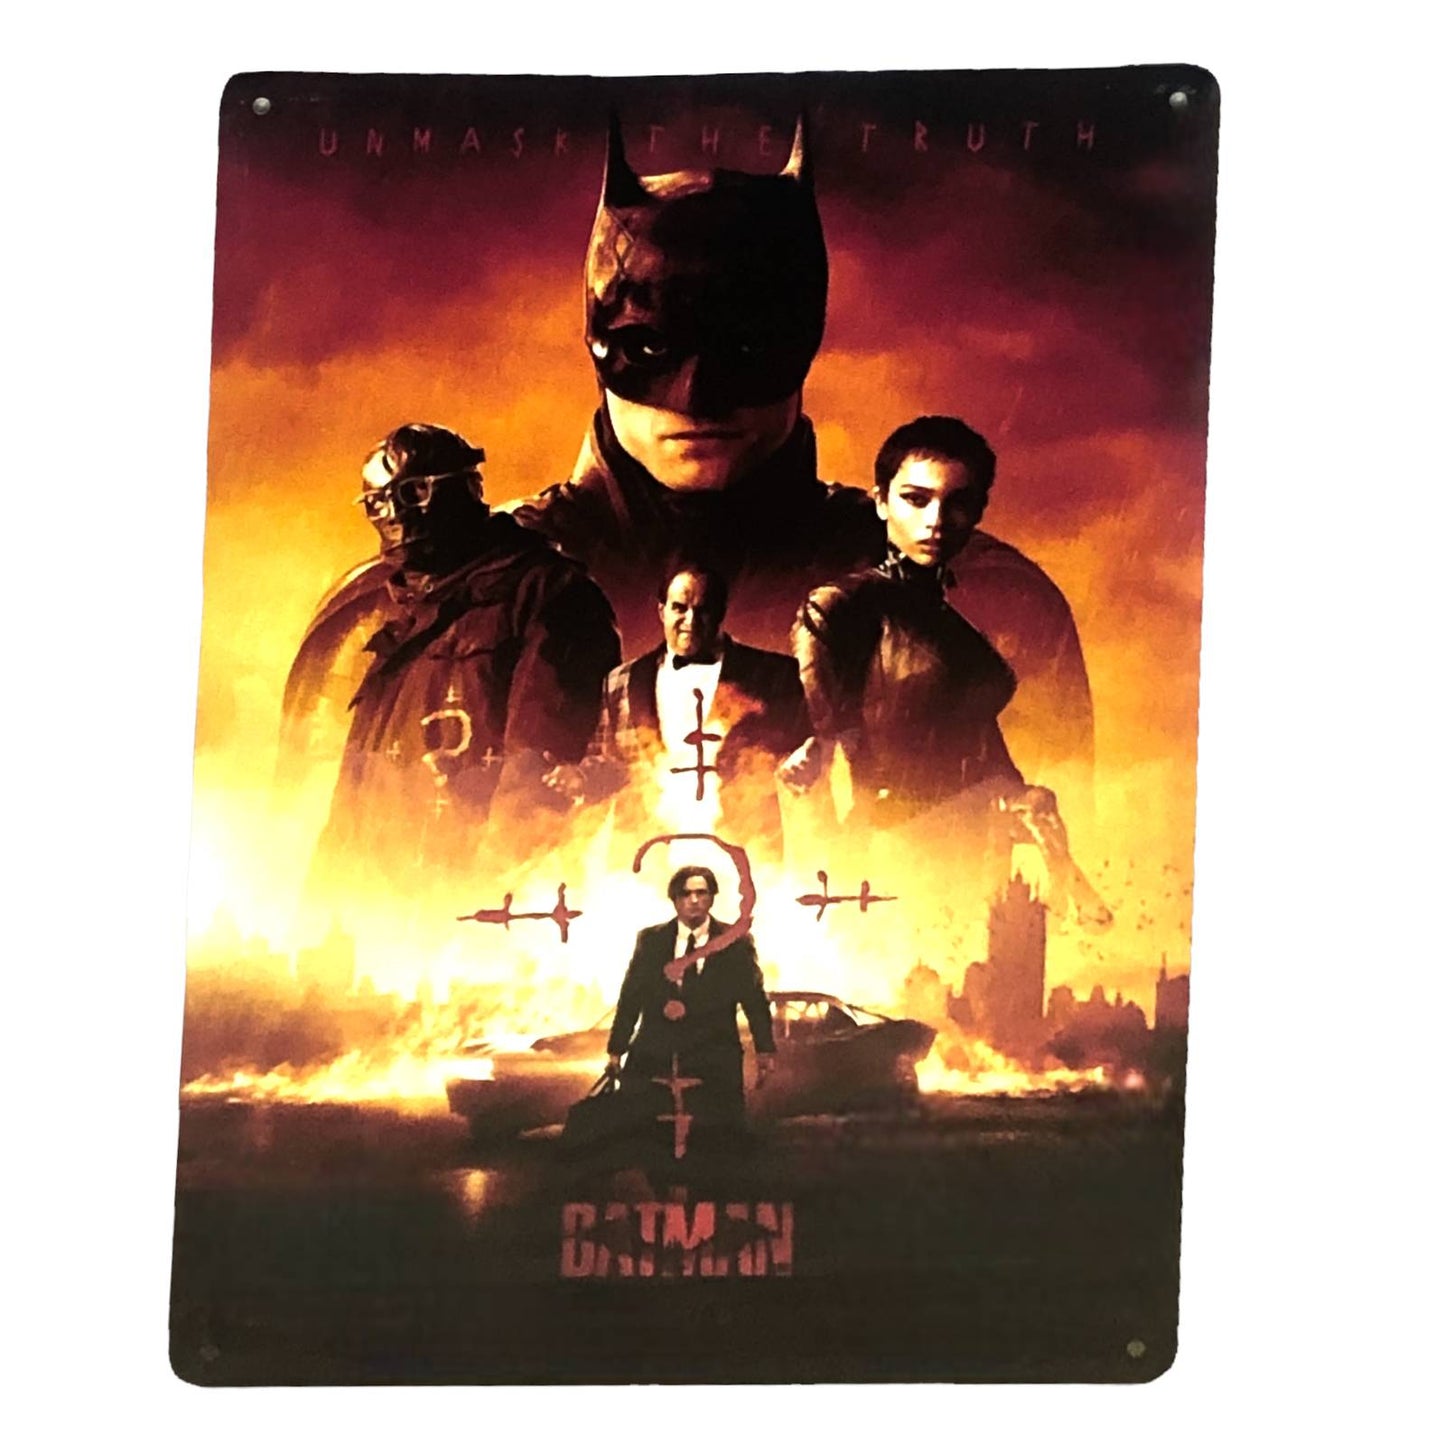 The Batman - Unmask the Truth Movie Poster Metal Tin Sign 8"x12"